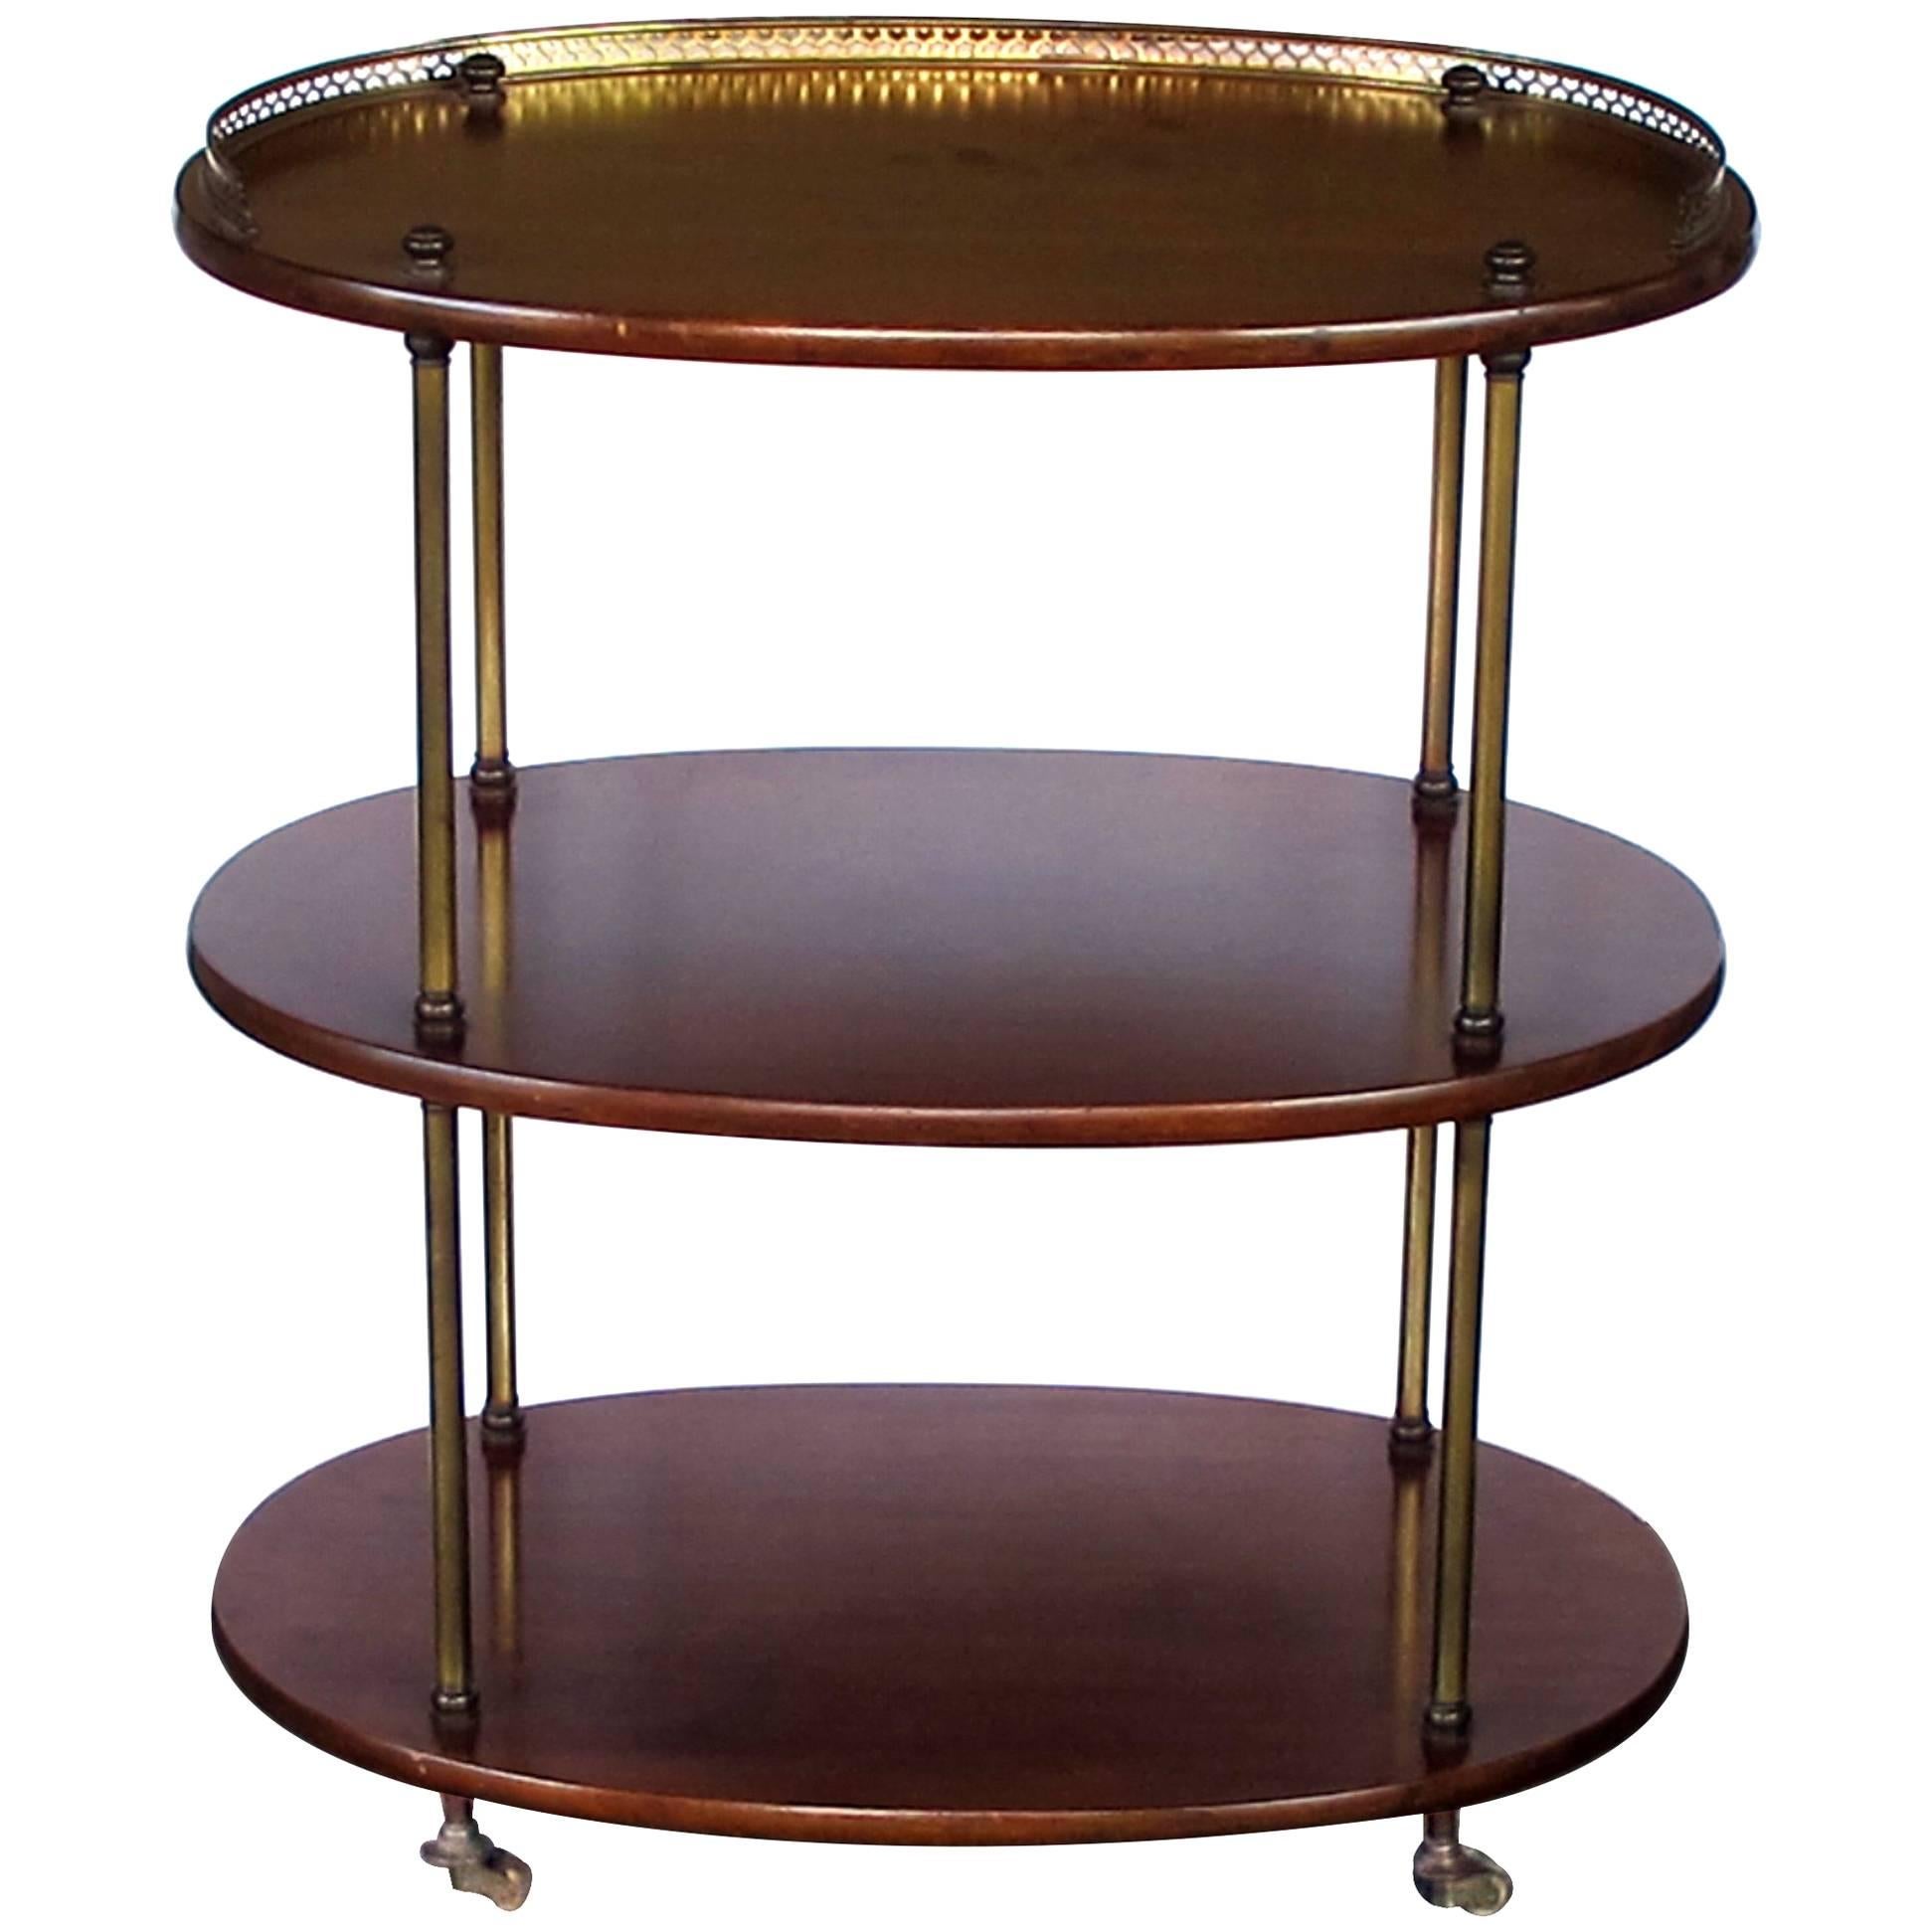 Handsome English Edwardian Three-Tier Mahogany Oval Etagere with Brass Mounts